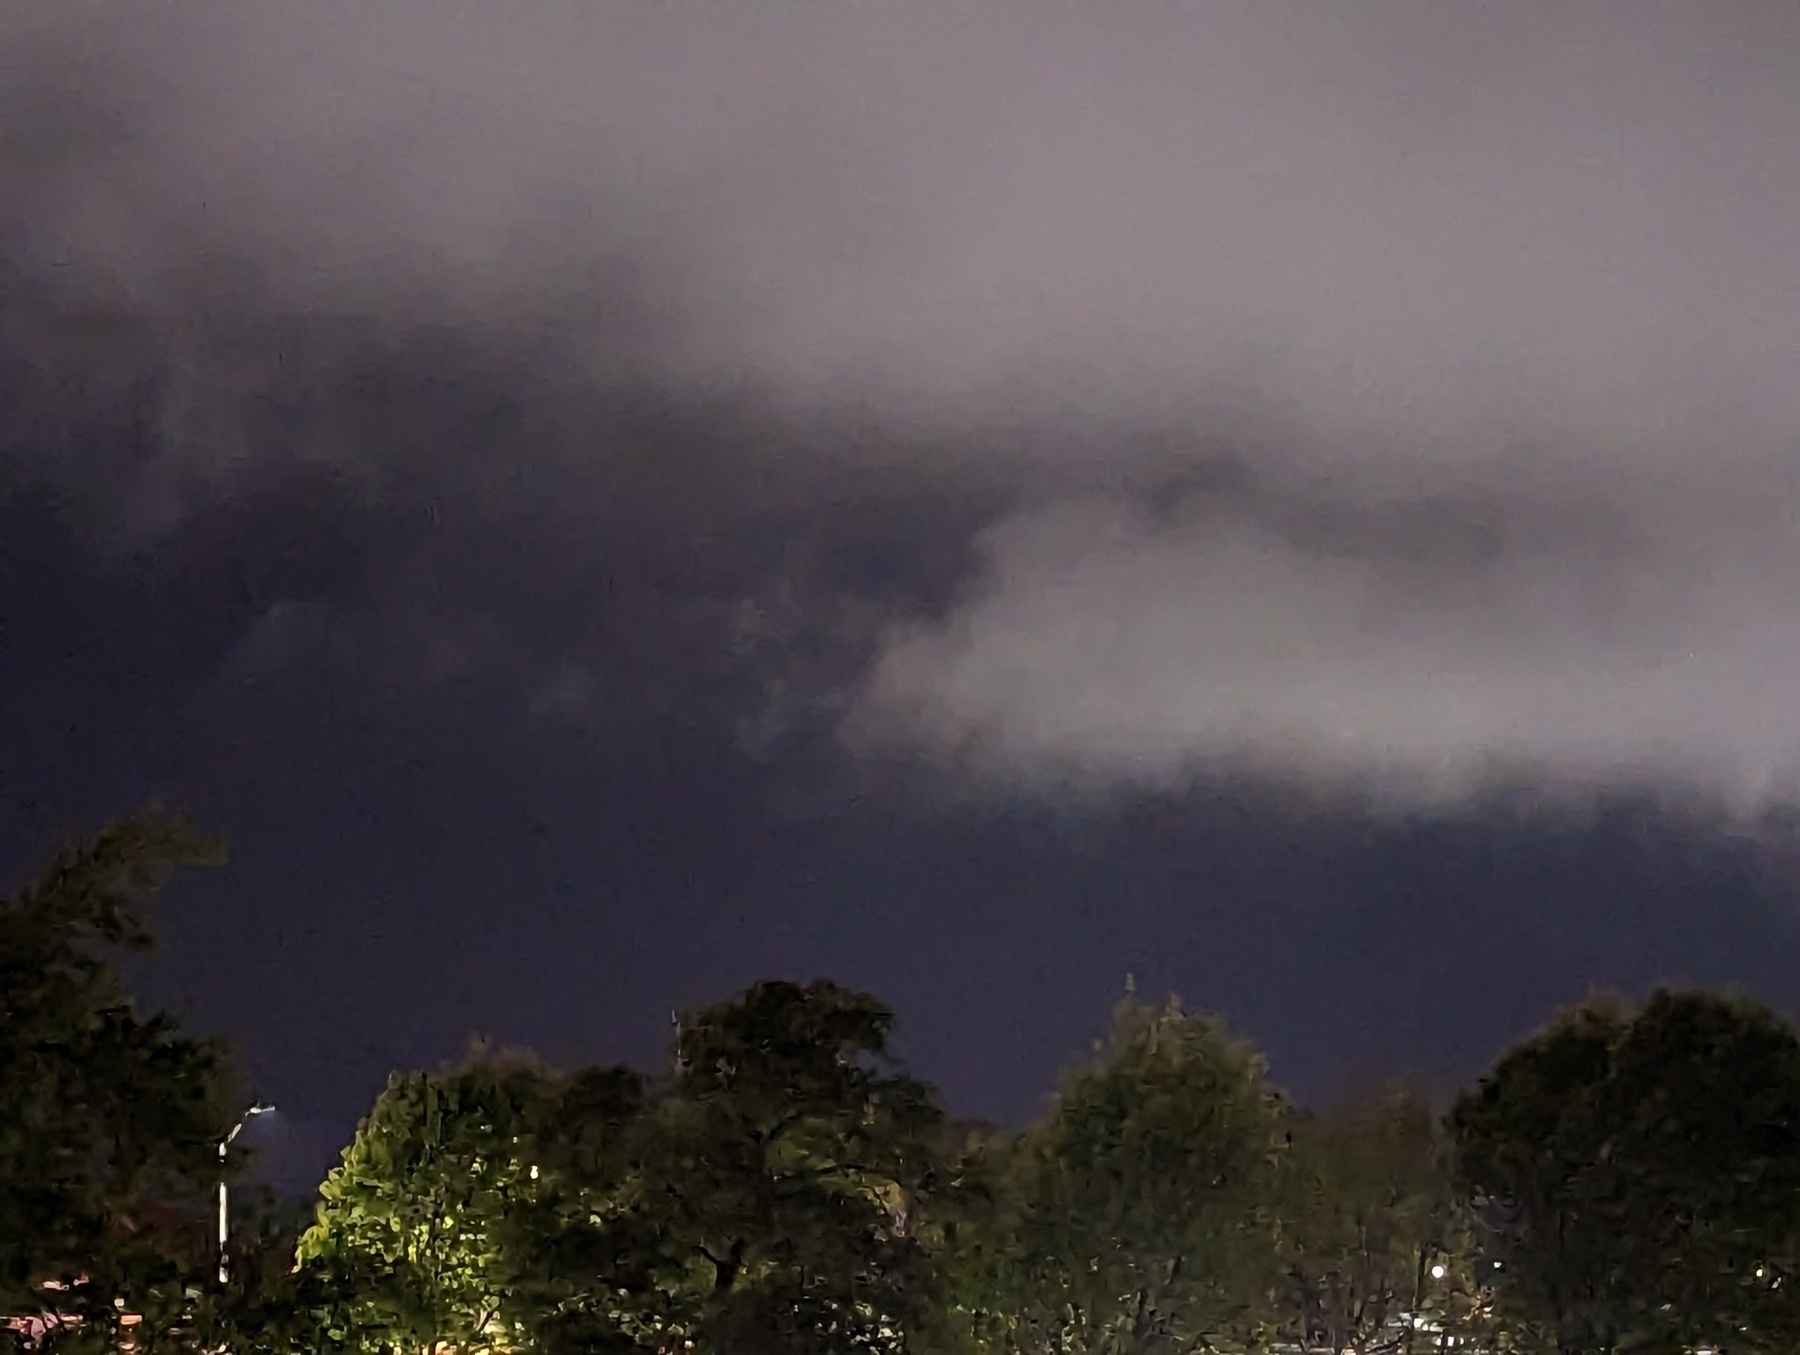 Pale gray puffy marine layer onshore flow clouds stream overhead, driven by winds from the south, against nearly navy blue night sky over the lamp illuminated tree topped western skyline Friday April 28, 2023 in San Pablo, California.